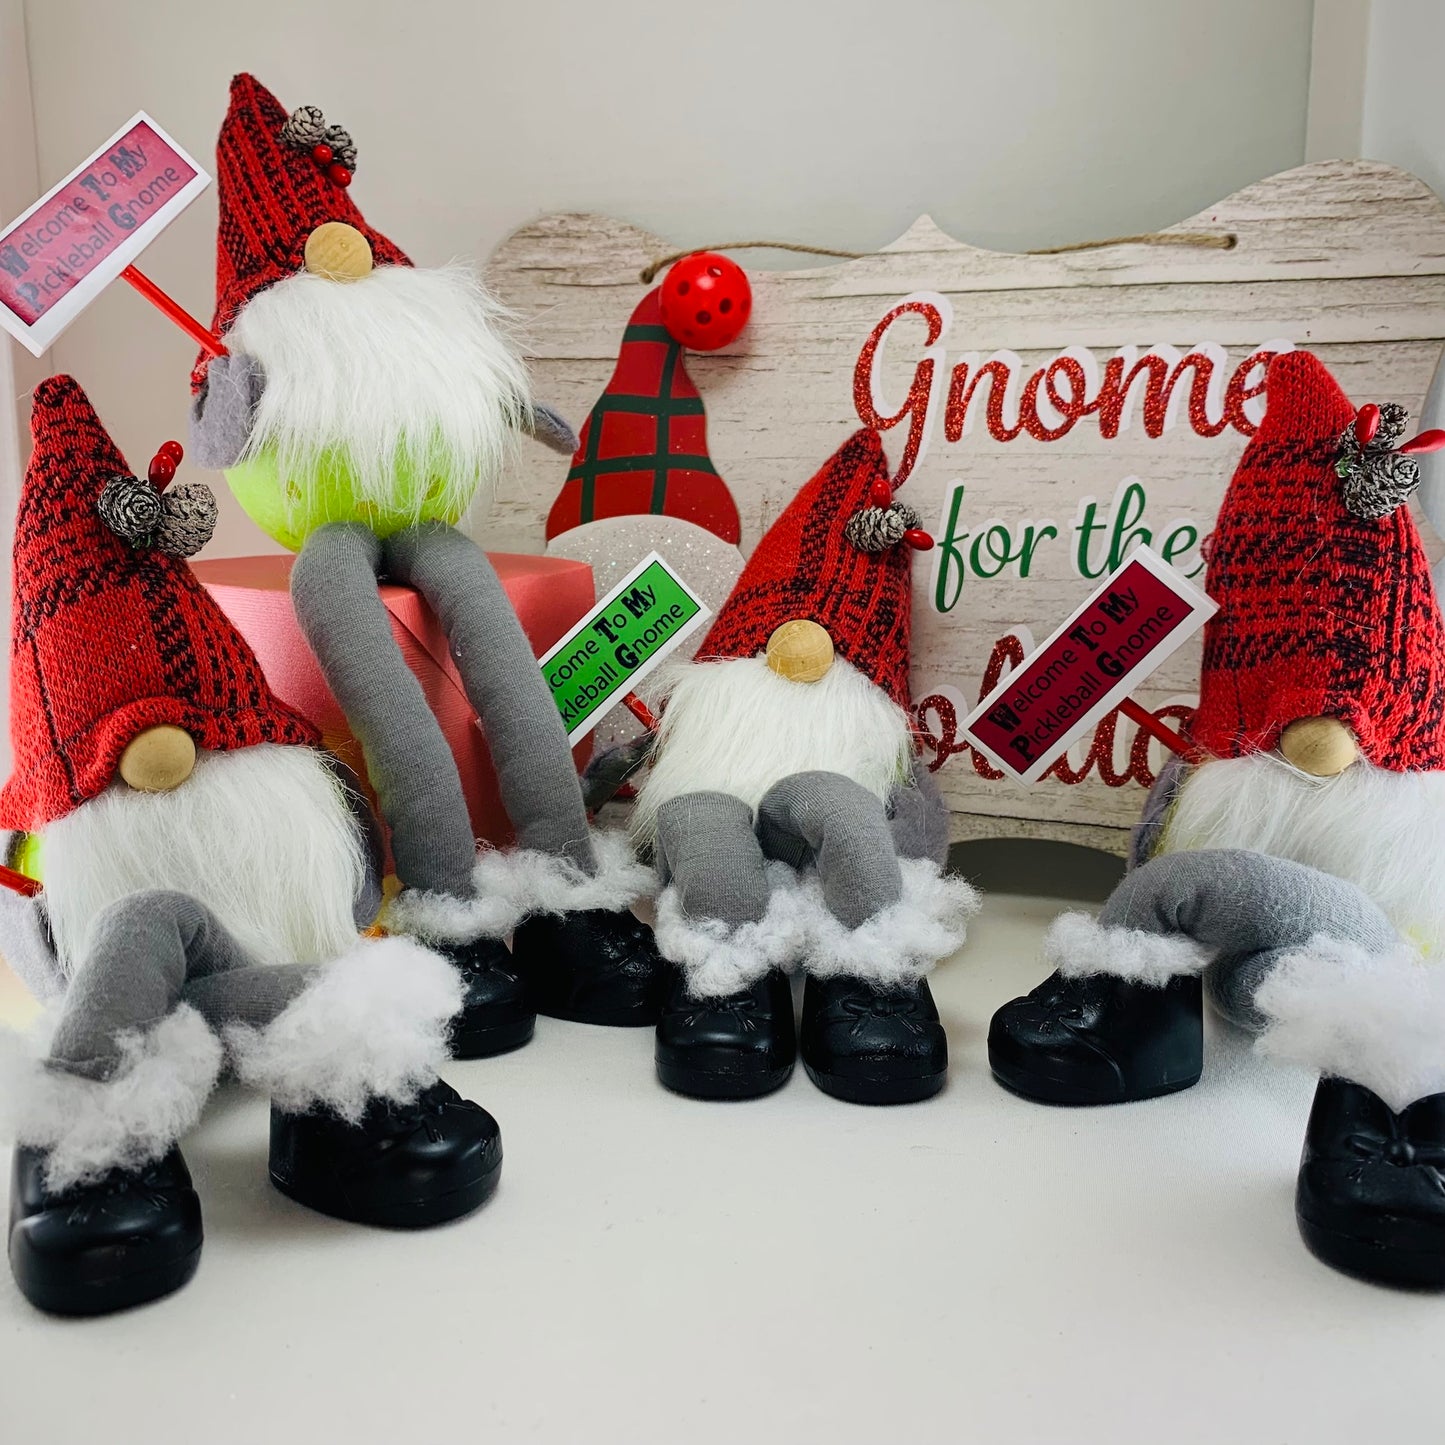 WELCOME HOME PICKLEBALL SITTING GNOME FOR THE HOLIDAY SEASON - DECORATION OR GIFT  These pickleball gnomes are perfect for decoration or gifts for your pickleball addicted friends. Each Pickleball Gnome's body is an upcycled full-sized pickleball with a sign welcoming those to your home!! These Gnomes are the perfect gifts for all you pickleball lovers in your life!! Adding a Pickleball Gnome to your house only makes it better.